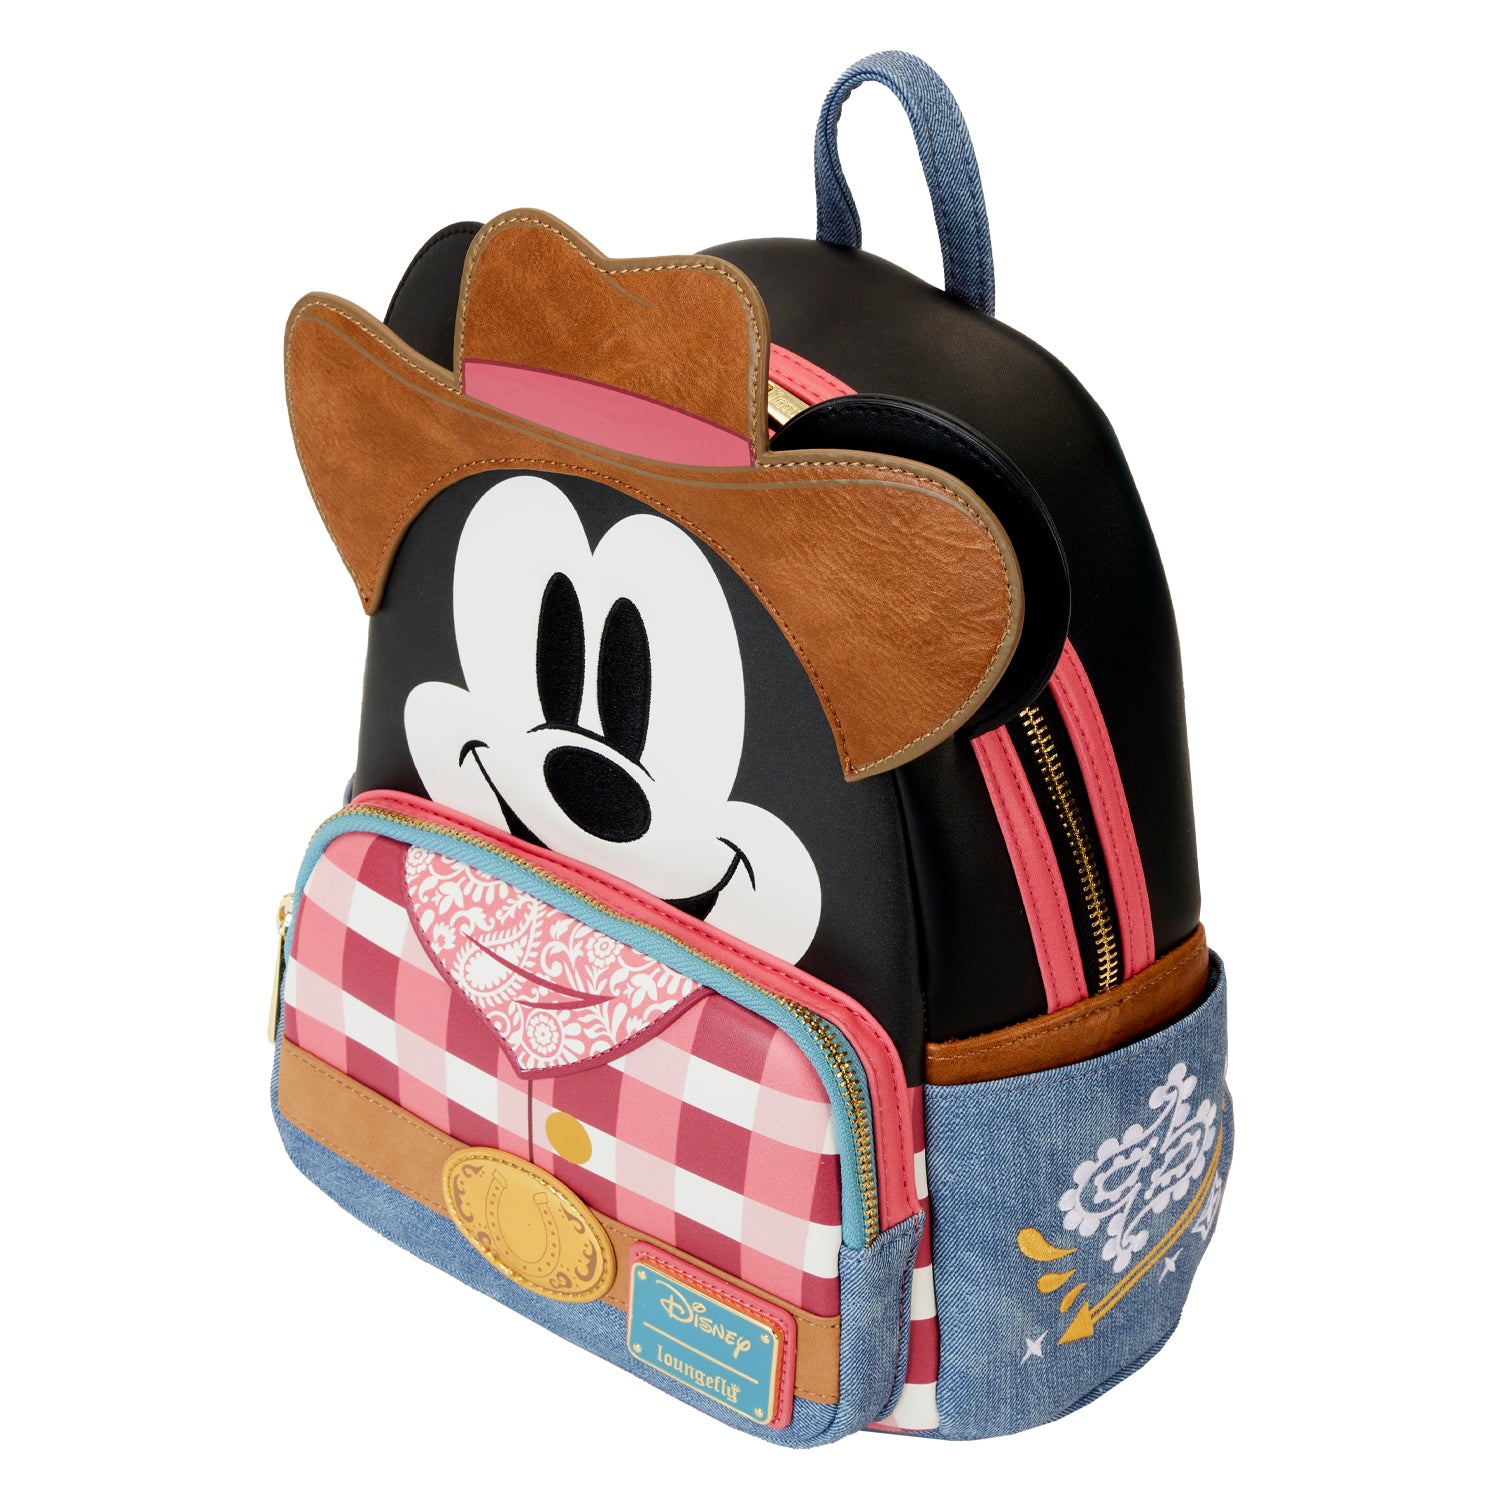 Disney | Western Mickey Mouse Cosplay Mini Backpack